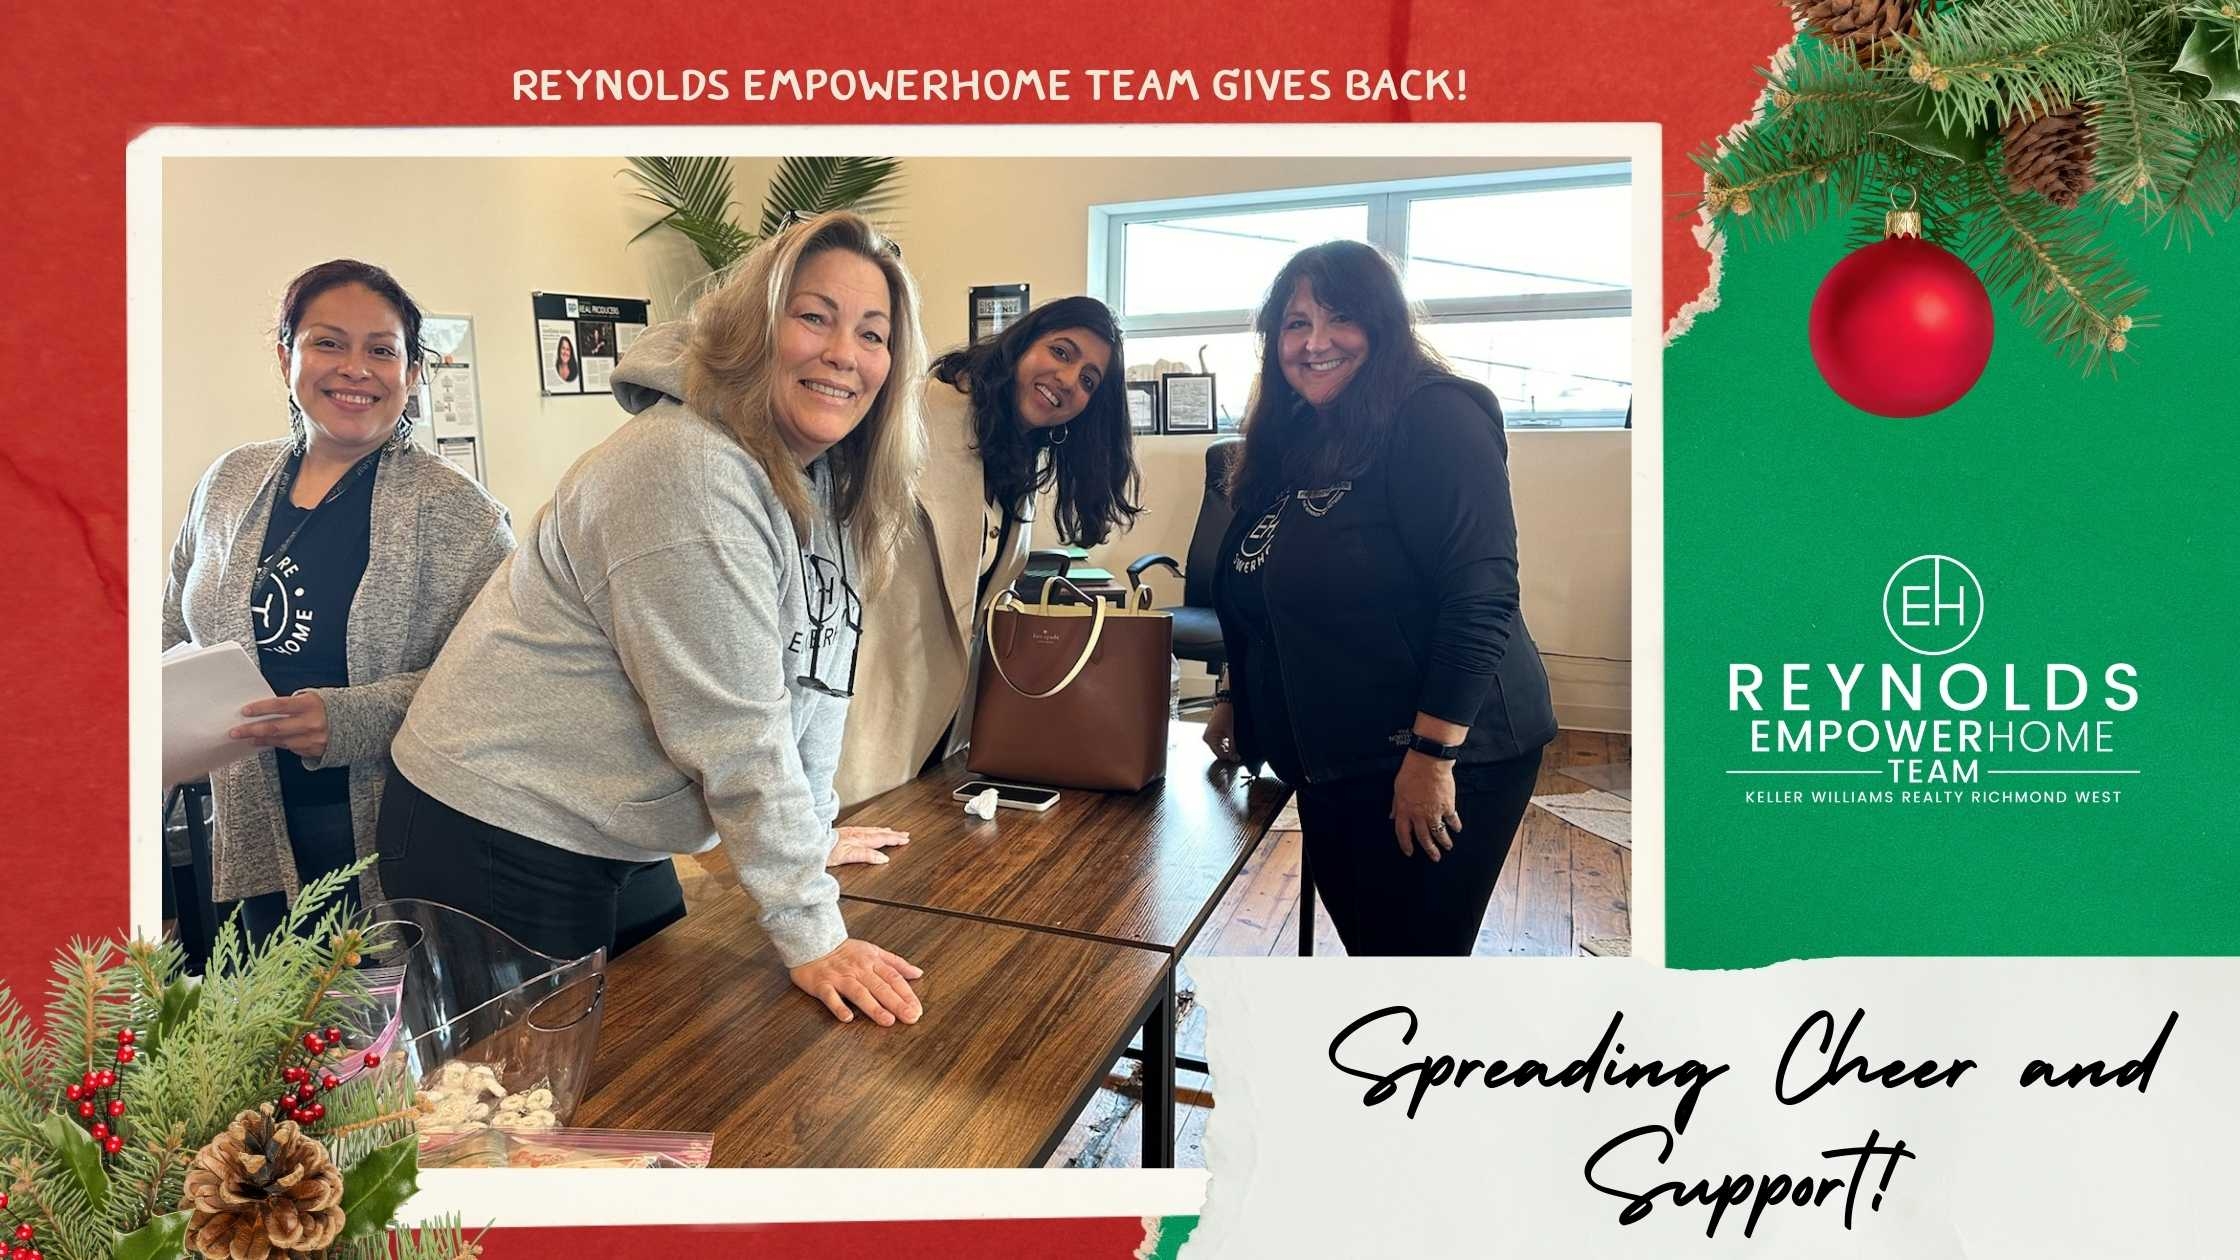 Reynolds EmpowerHome Team’s Dedication to Giving Back and Making a Difference